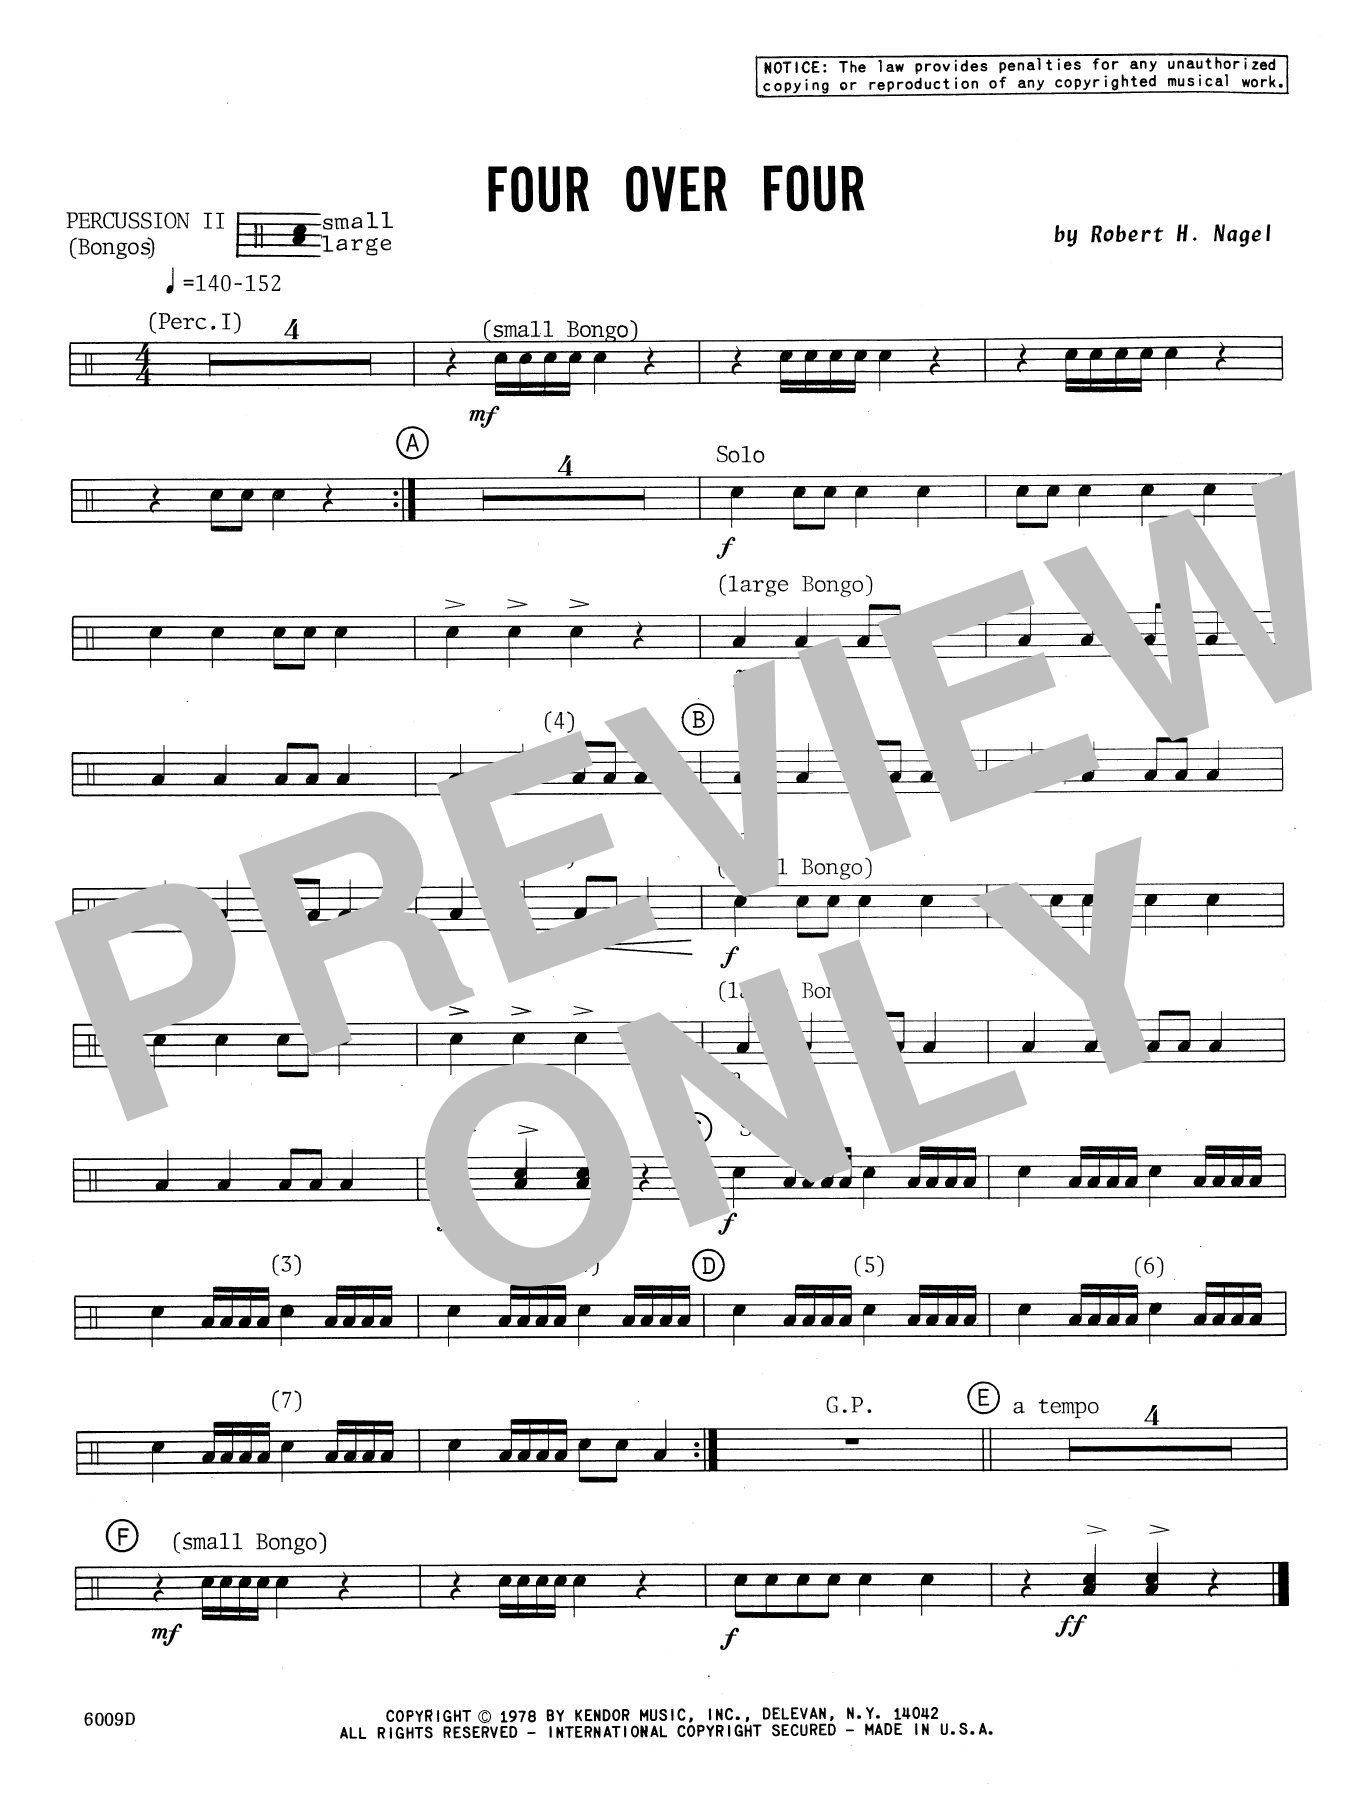 Download Robert H. Nagel Four Over Four - Percussion 2 Sheet Music